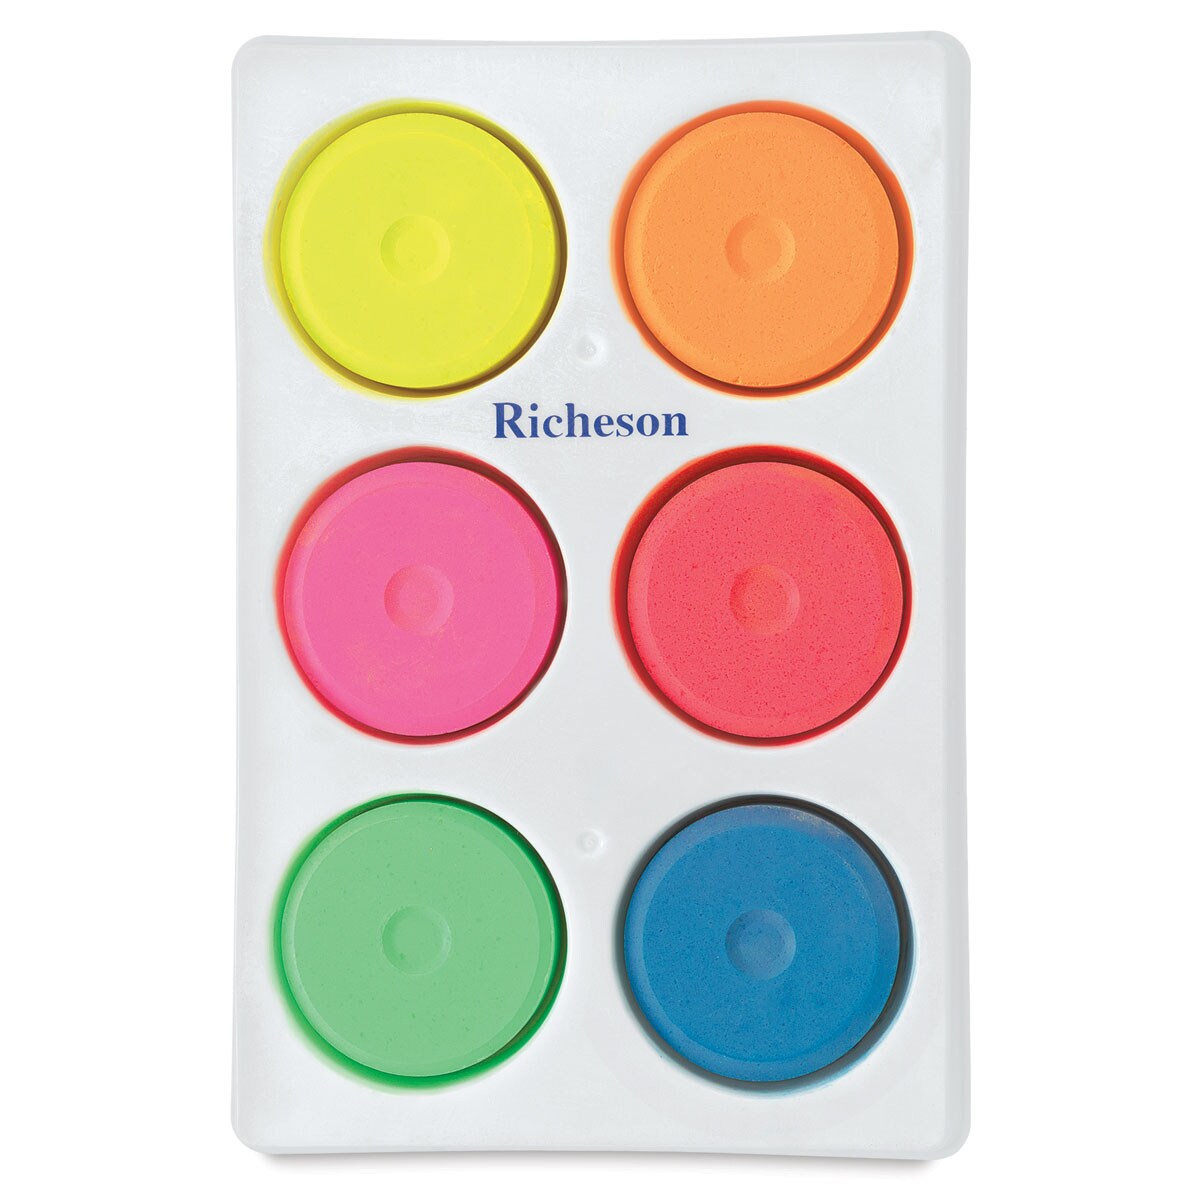 Richeson Tempera Cakes and Sets - Small, Set of 6, Assorted Fluorescent Colors With Tray